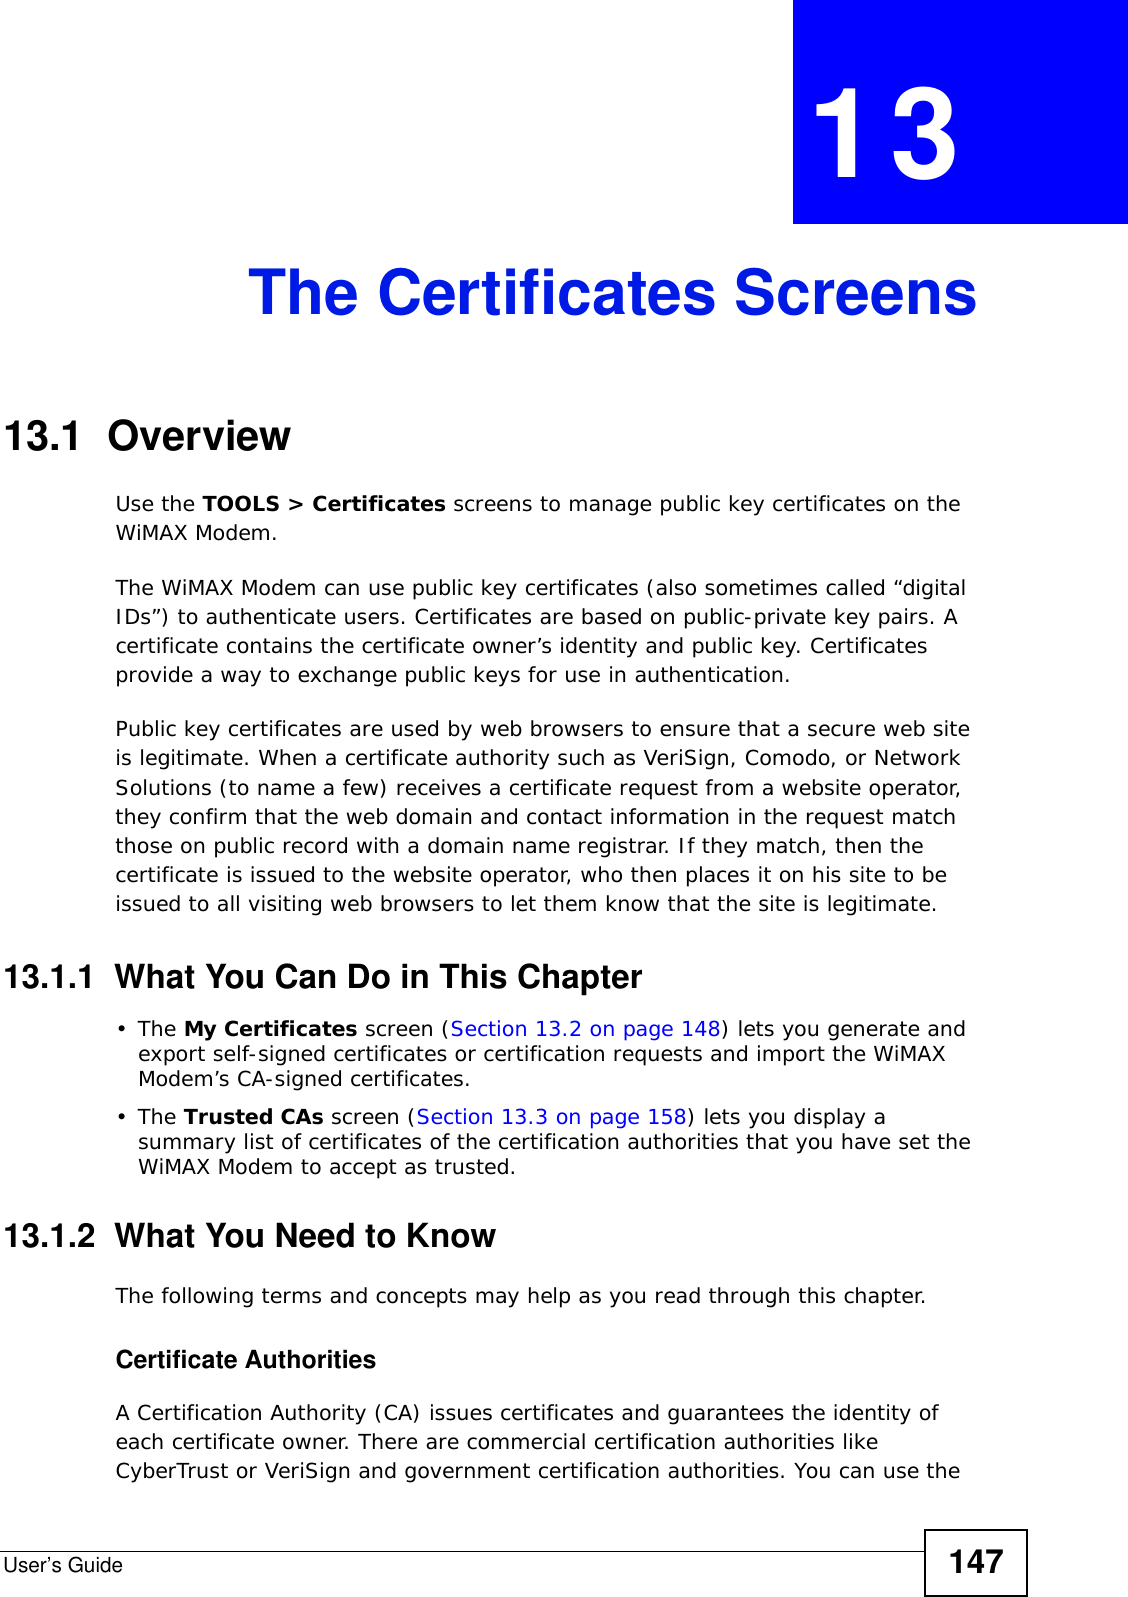 User’s Guide 147CHAPTER  13 The Certificates Screens13.1  OverviewUse the TOOLS &gt; Certificates screens to manage public key certificates on the WiMAX Modem.The WiMAX Modem can use public key certificates (also sometimes called “digital IDs”) to authenticate users. Certificates are based on public-private key pairs. A certificate contains the certificate owner’s identity and public key. Certificates provide a way to exchange public keys for use in authentication.Public key certificates are used by web browsers to ensure that a secure web site is legitimate. When a certificate authority such as VeriSign, Comodo, or Network Solutions (to name a few) receives a certificate request from a website operator, they confirm that the web domain and contact information in the request match those on public record with a domain name registrar. If they match, then the certificate is issued to the website operator, who then places it on his site to be issued to all visiting web browsers to let them know that the site is legitimate.13.1.1  What You Can Do in This Chapter•The My Certificates screen (Section 13.2 on page 148) lets you generate and export self-signed certificates or certification requests and import the WiMAX Modem’s CA-signed certificates.•The Trusted CAs screen (Section 13.3 on page 158) lets you display a summary list of certificates of the certification authorities that you have set the WiMAX Modem to accept as trusted.13.1.2  What You Need to KnowThe following terms and concepts may help as you read through this chapter.Certificate AuthoritiesA Certification Authority (CA) issues certificates and guarantees the identity of each certificate owner. There are commercial certification authorities like CyberTrust or VeriSign and government certification authorities. You can use the 